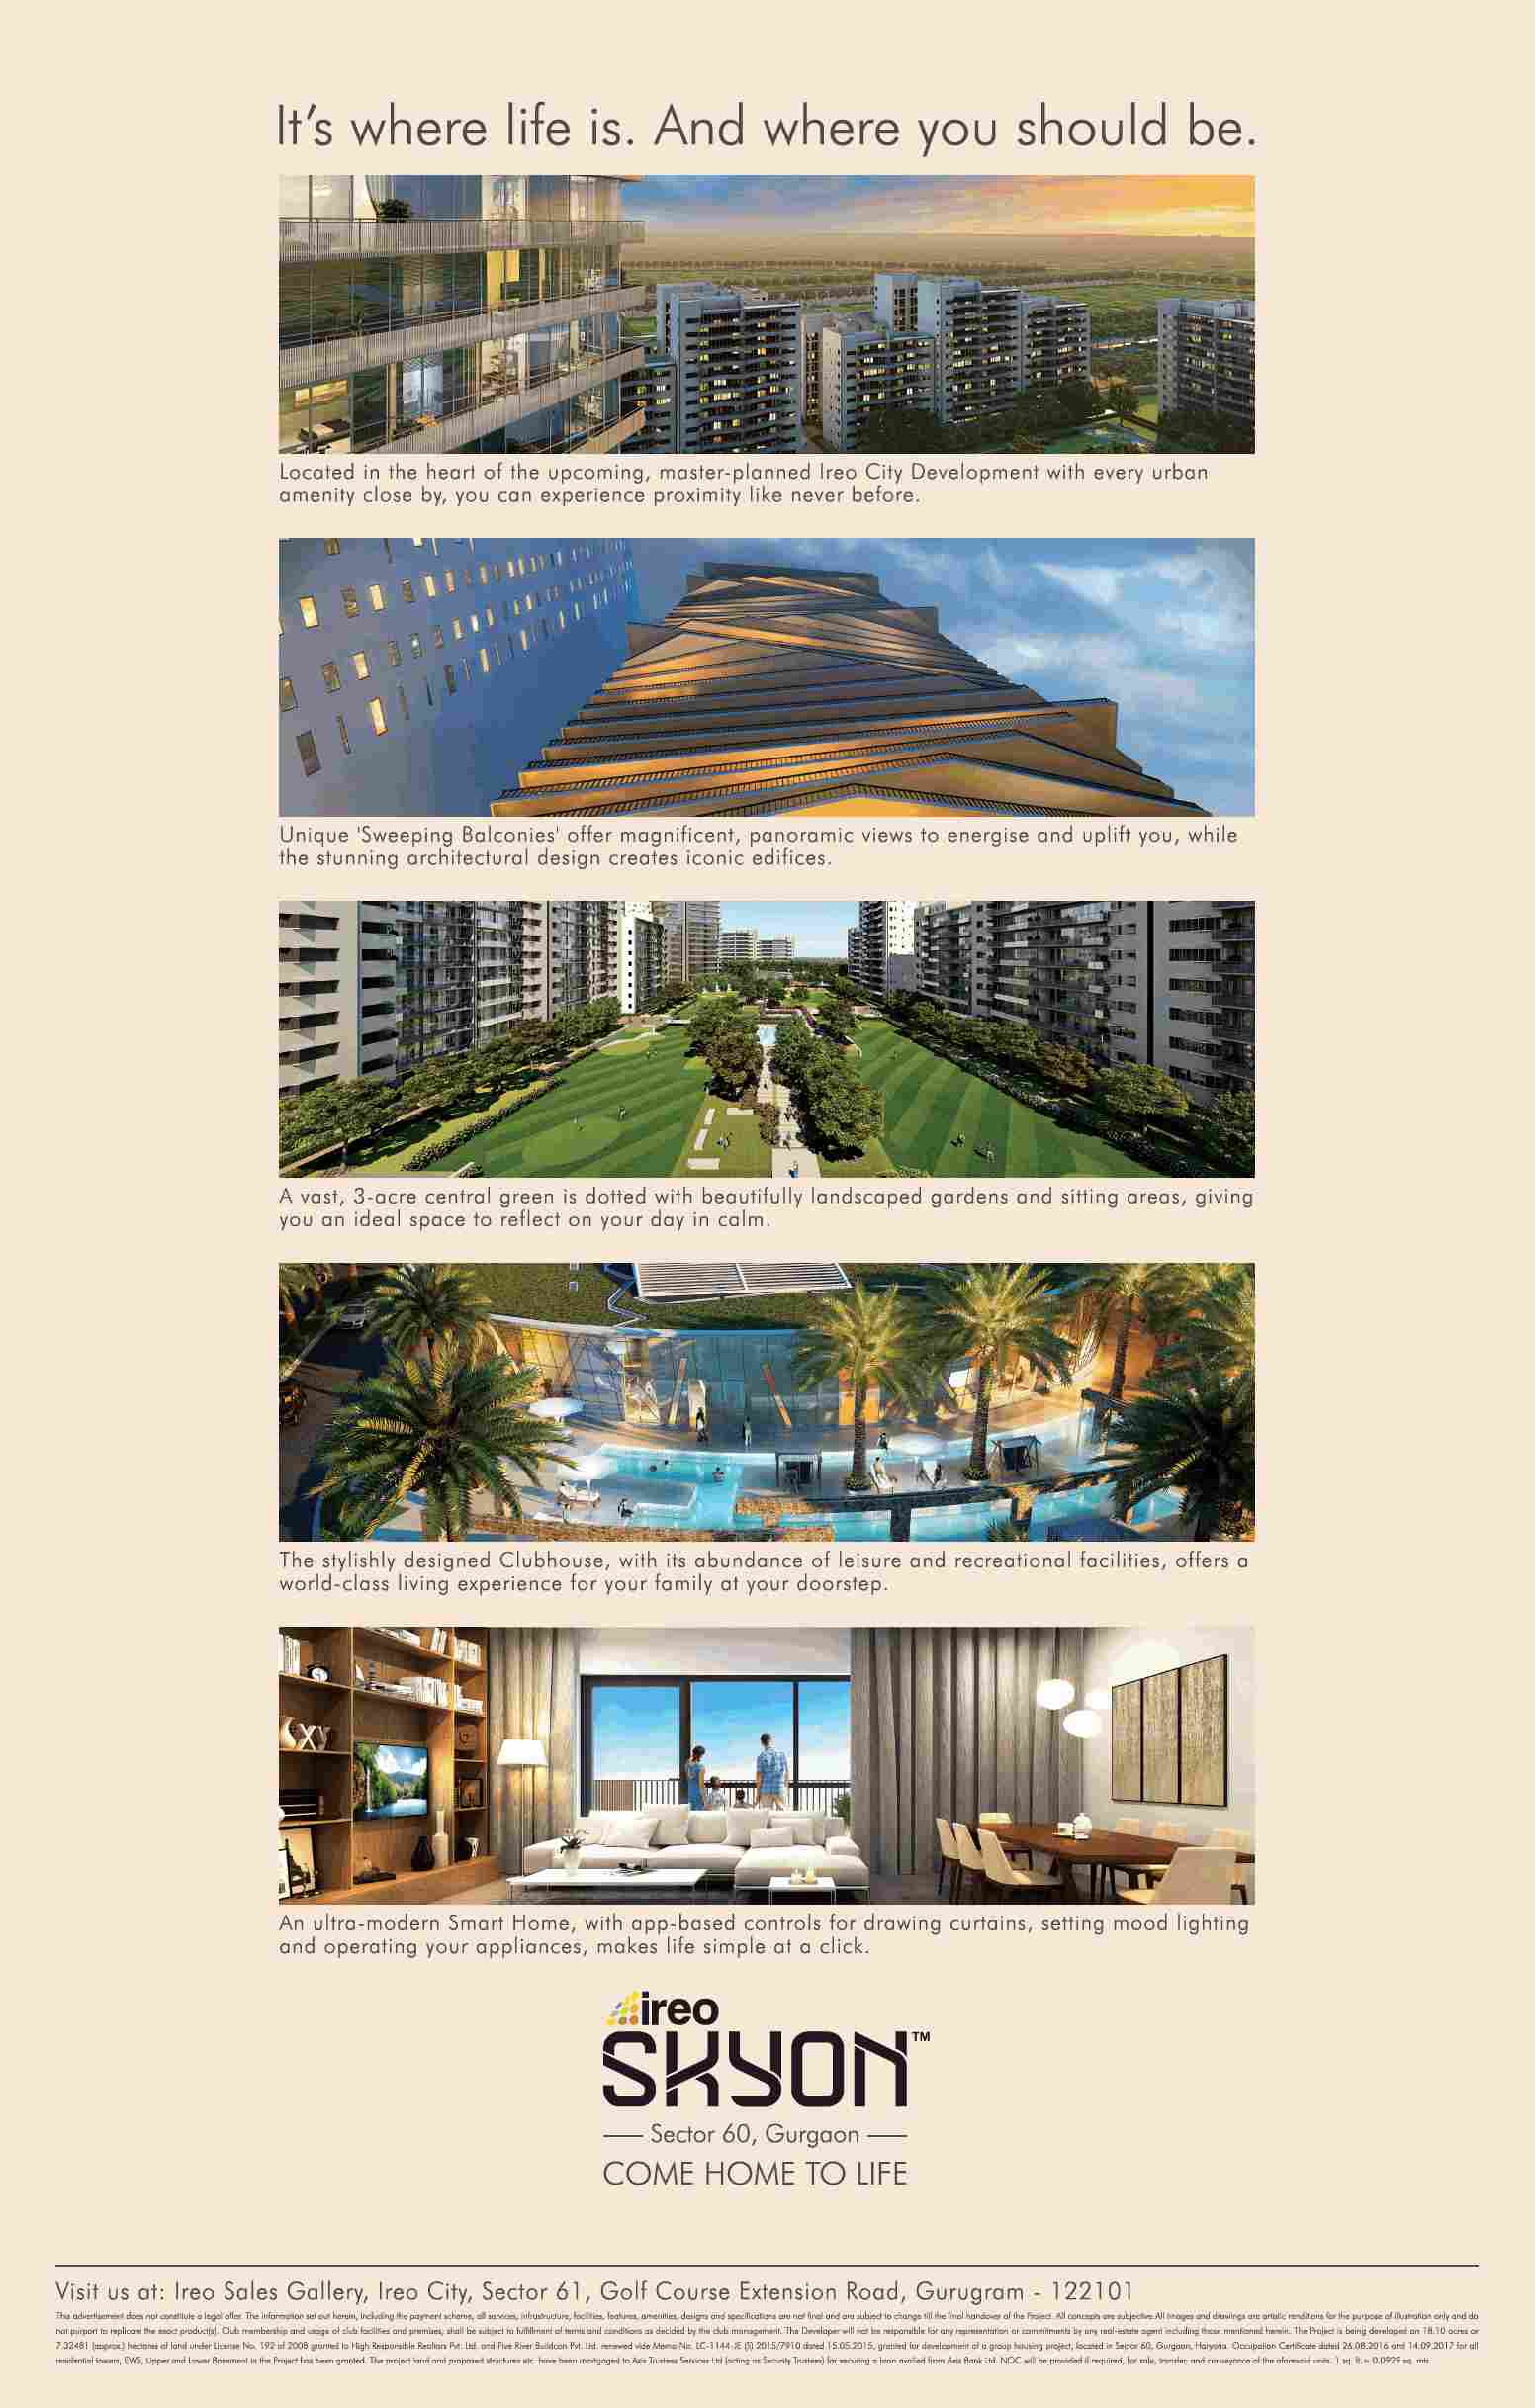 Experience panoramic views to energise and uplift yourself at Ireo Skyon in Gurgaon Update